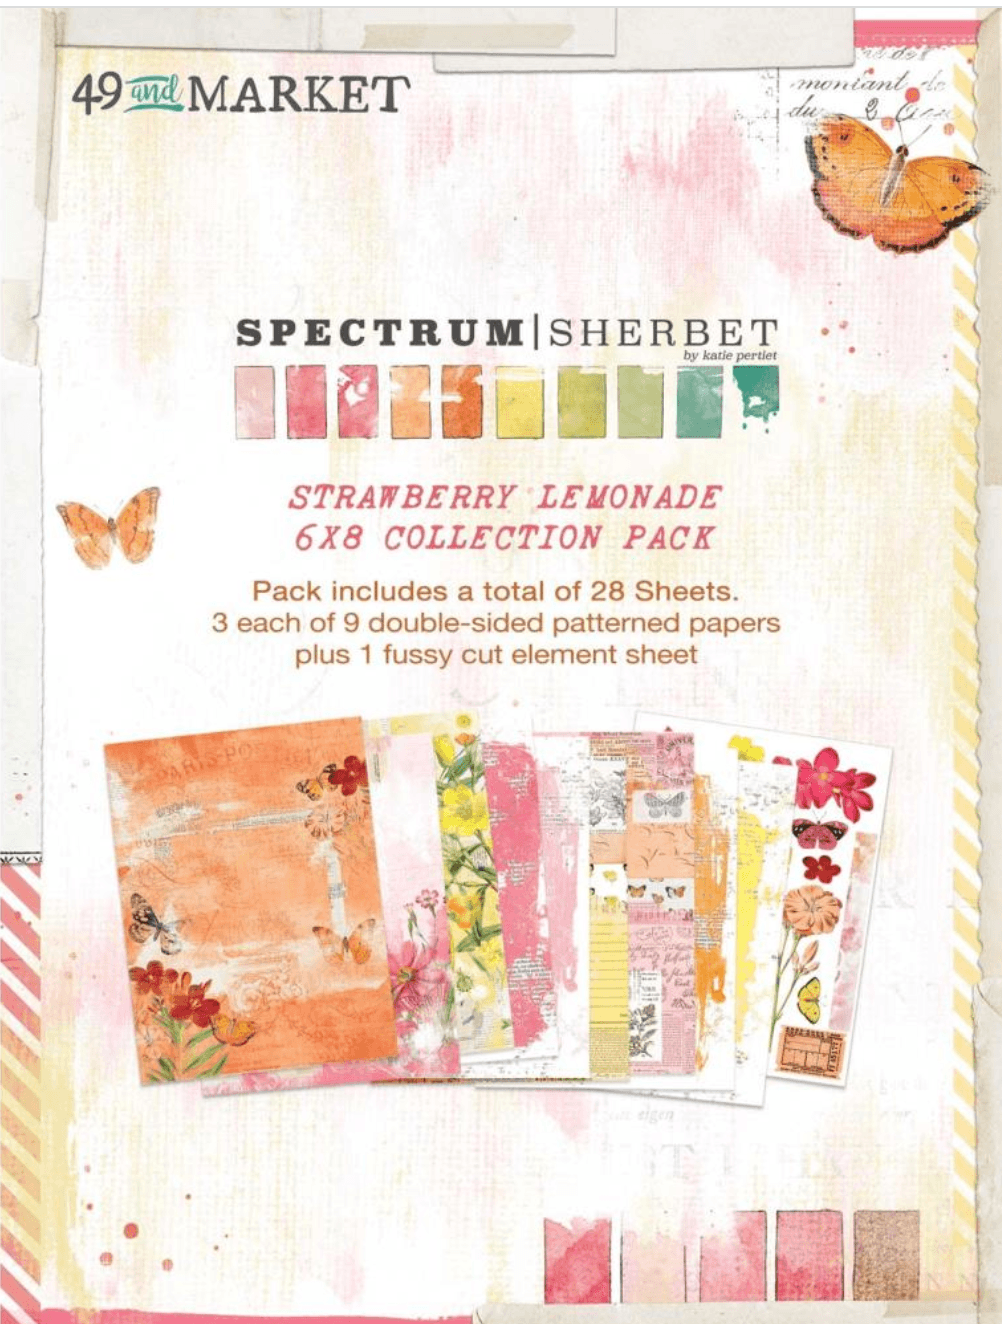 49 and Market - Spectrum Sherbet Strawberry Lemonade Pack - 6x8 Inch - Messy Papercrafts